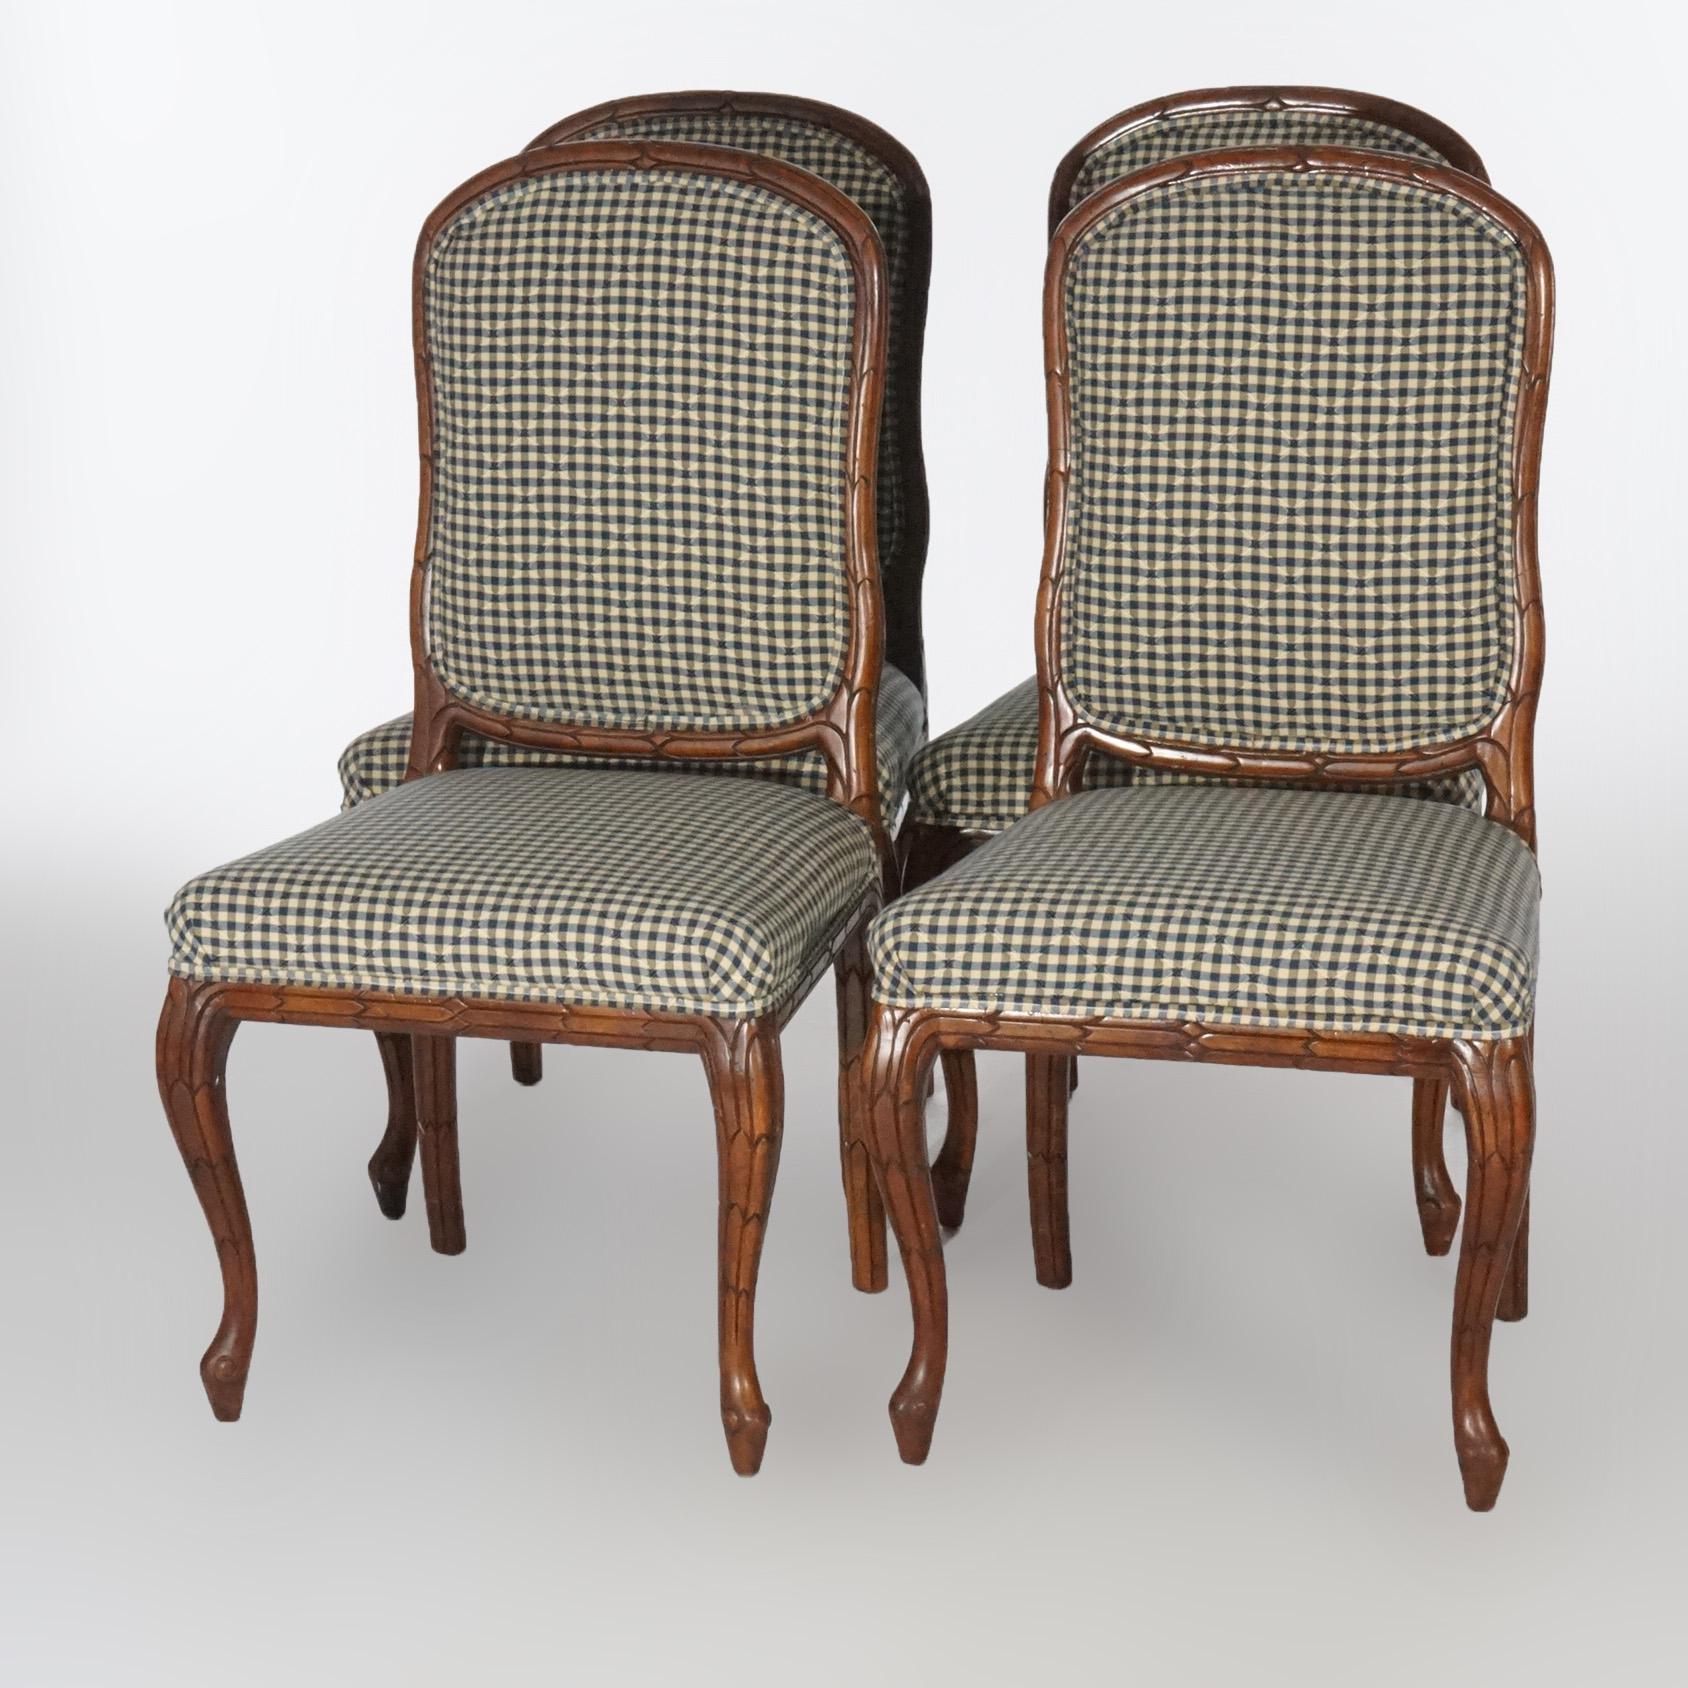 A set of four antique Continental dining chairs offer carved walnut frames with upholstered backs and seats, raised on cabriole legs, circa 1920.

Measures- 39.5''H x 20.5''W x 21.5''D.